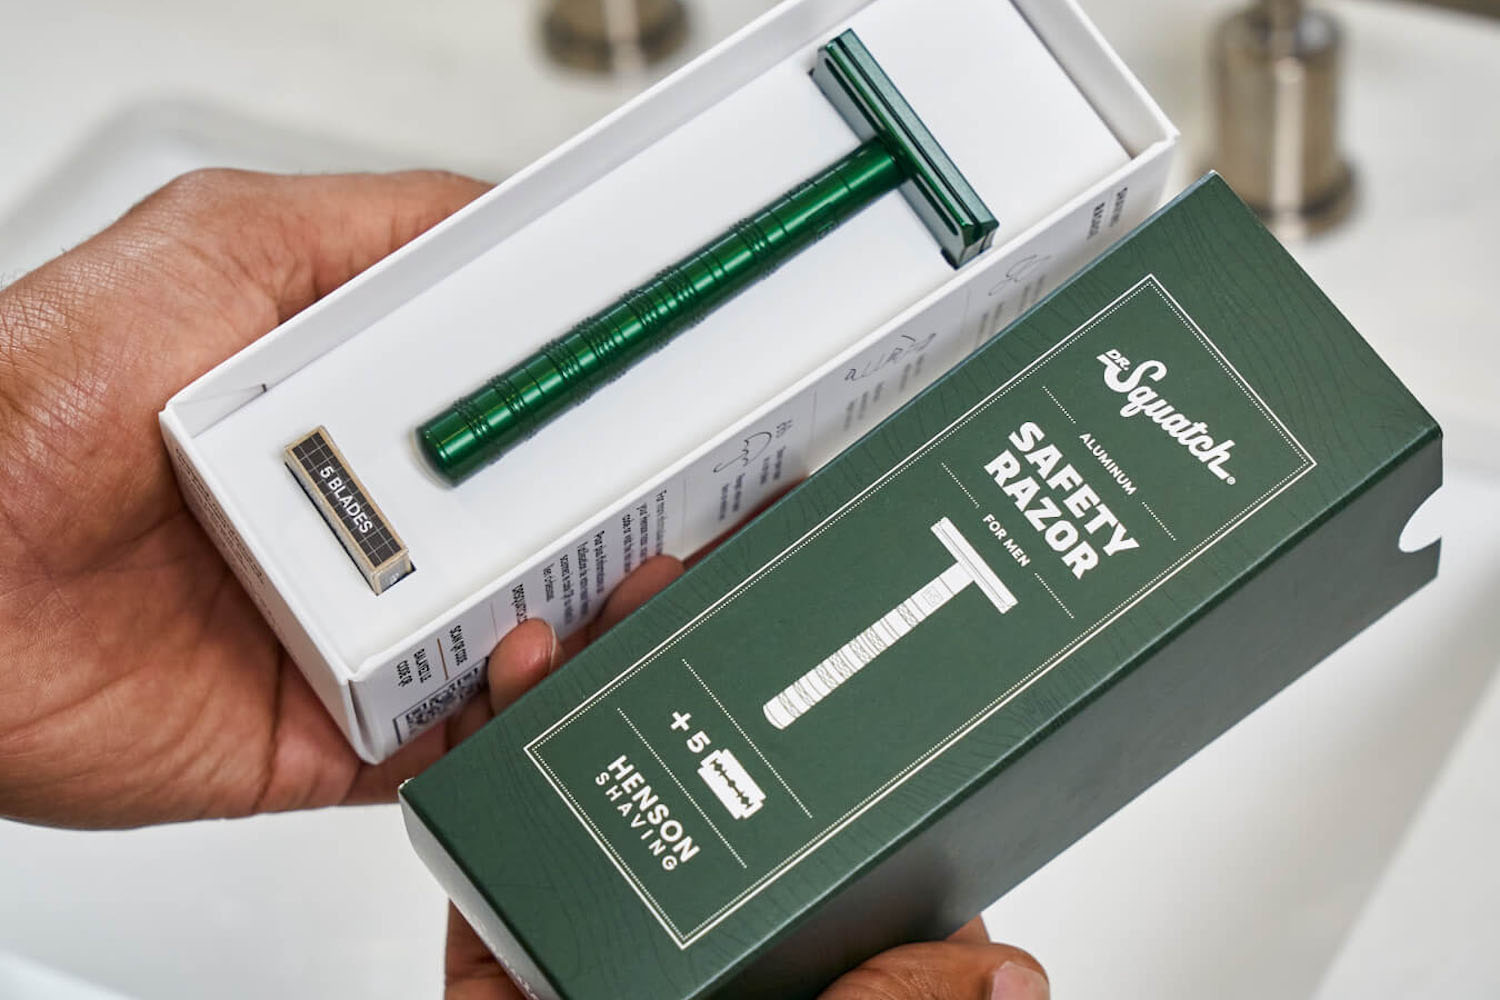 Dr Squach x Henson Safety Razor in someones hands